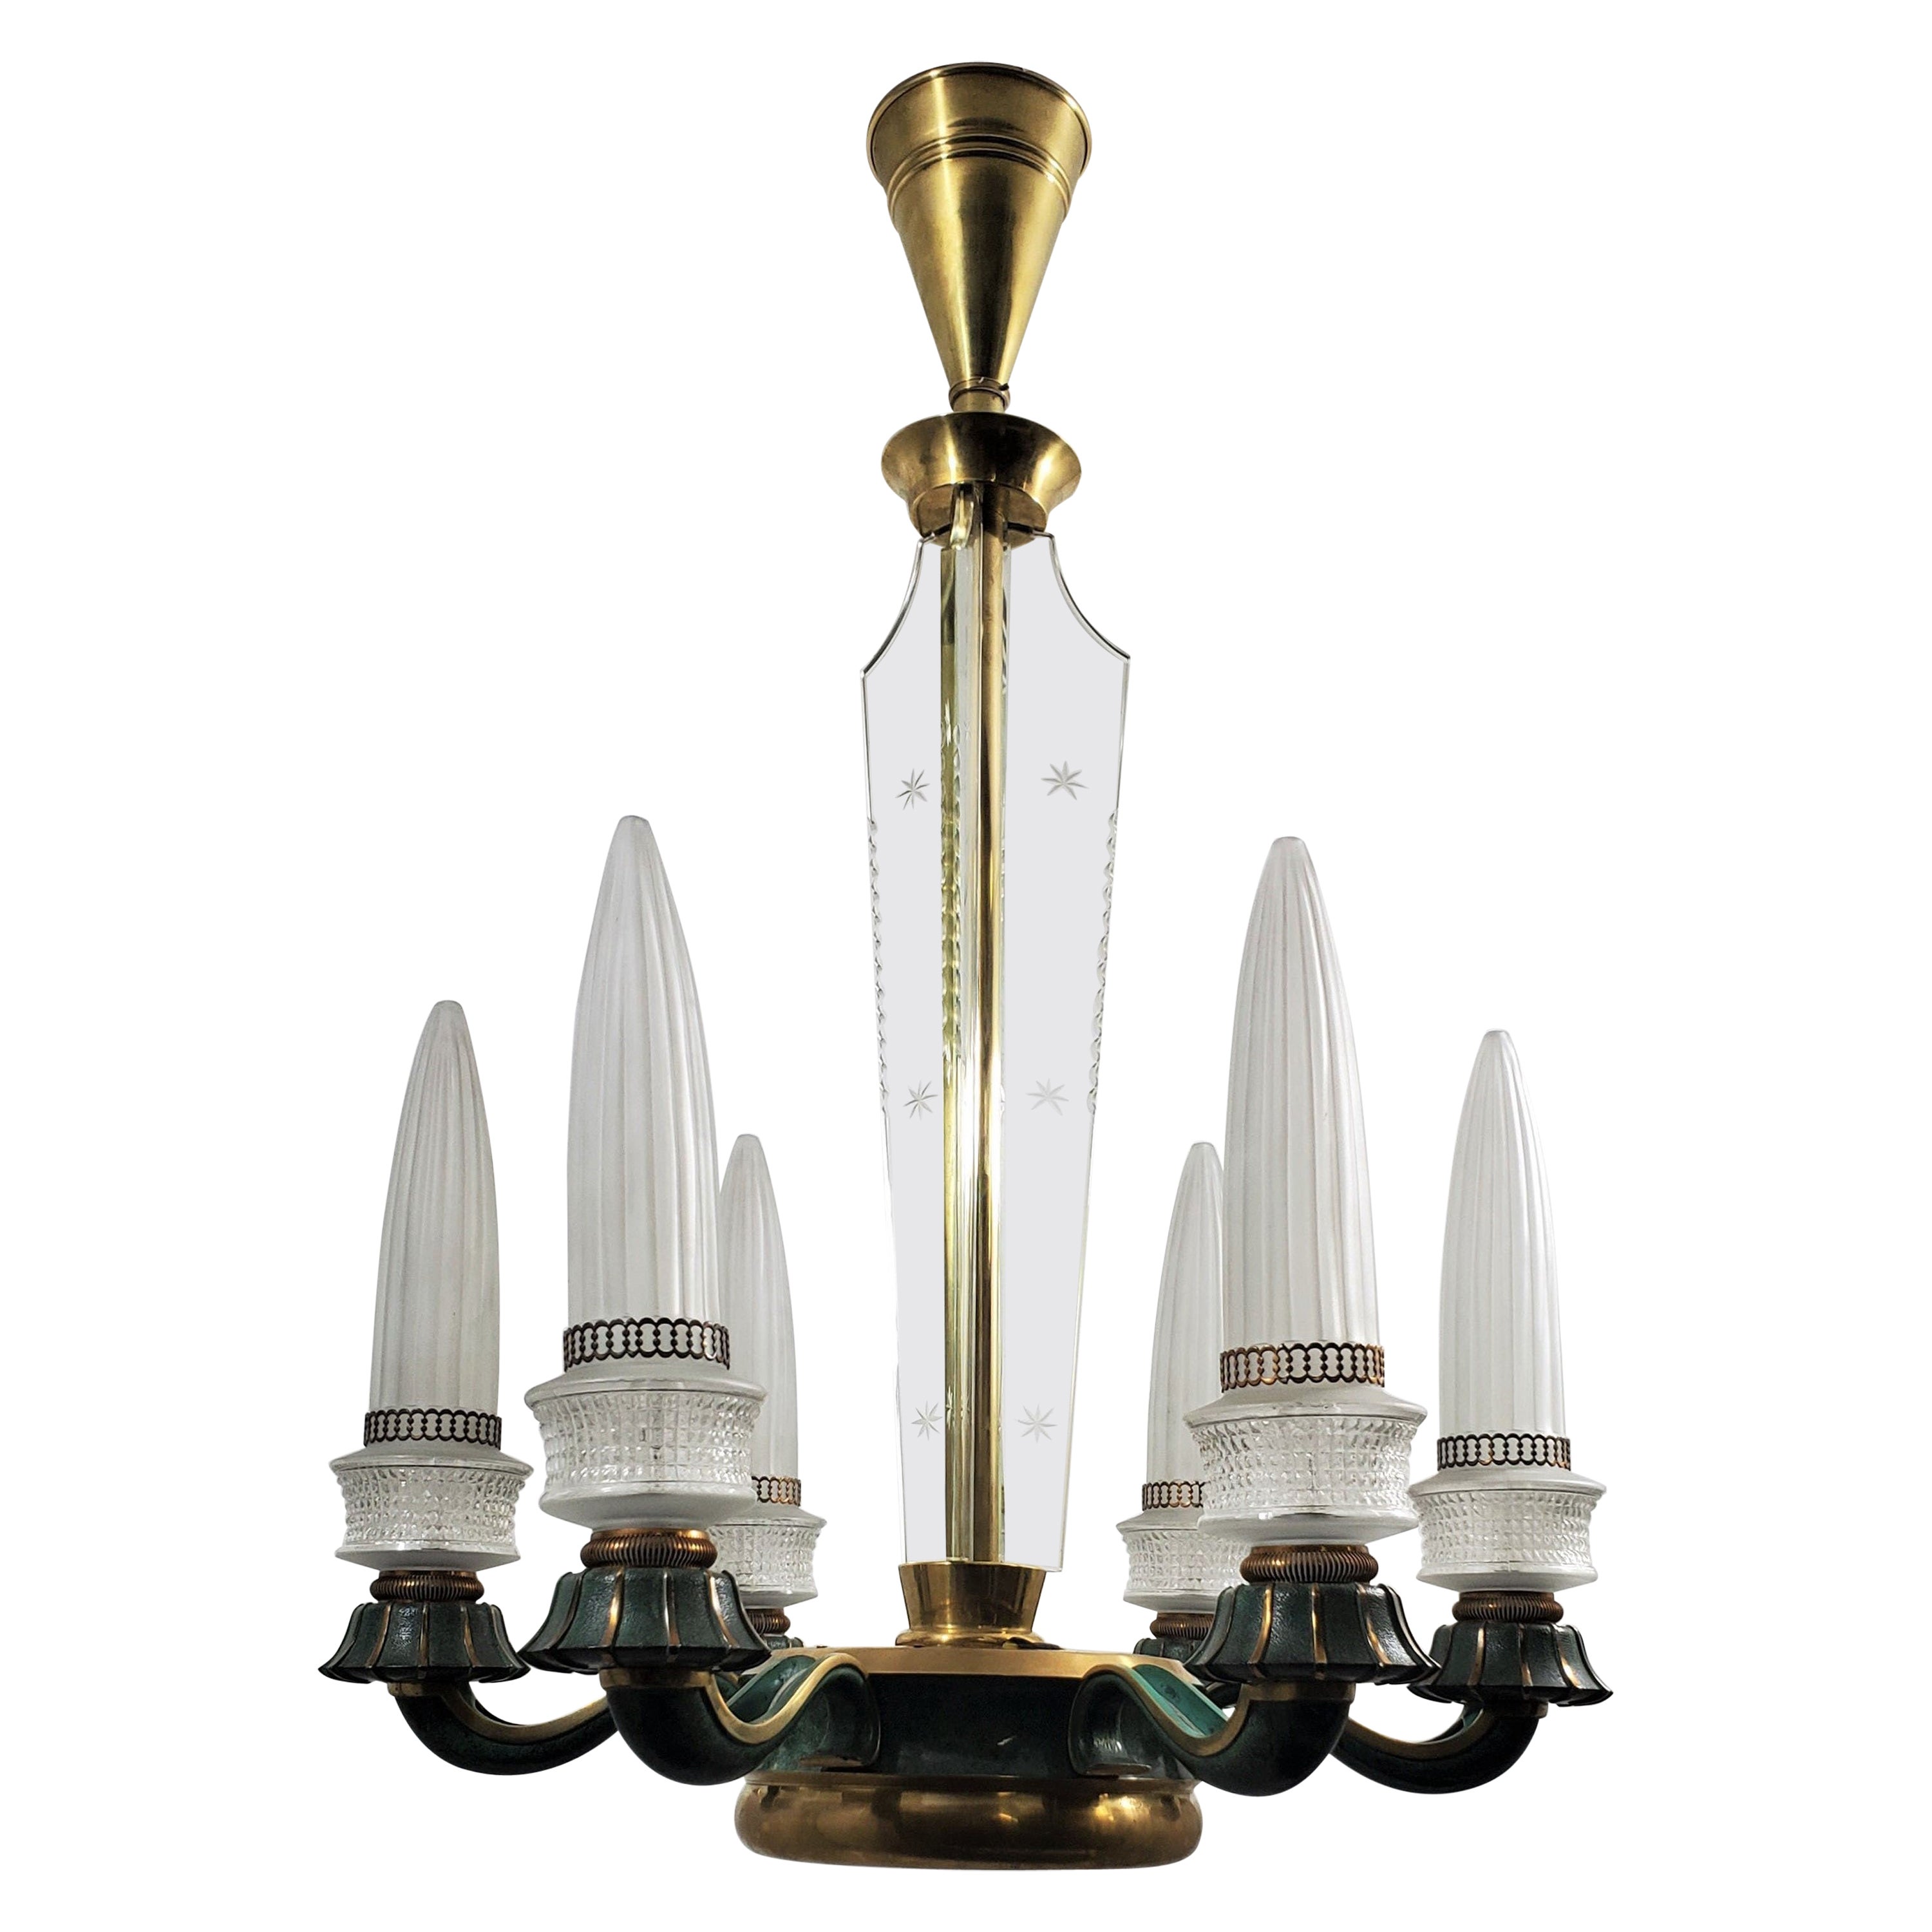 A rare French chandelier boasts six rocket-shaped glass shades on six gently curved arms, adorned with beautifully machined, fluted bobeches. 
The distinctive frosted glass pointed cone shades of this chandelier take on the form of architectural